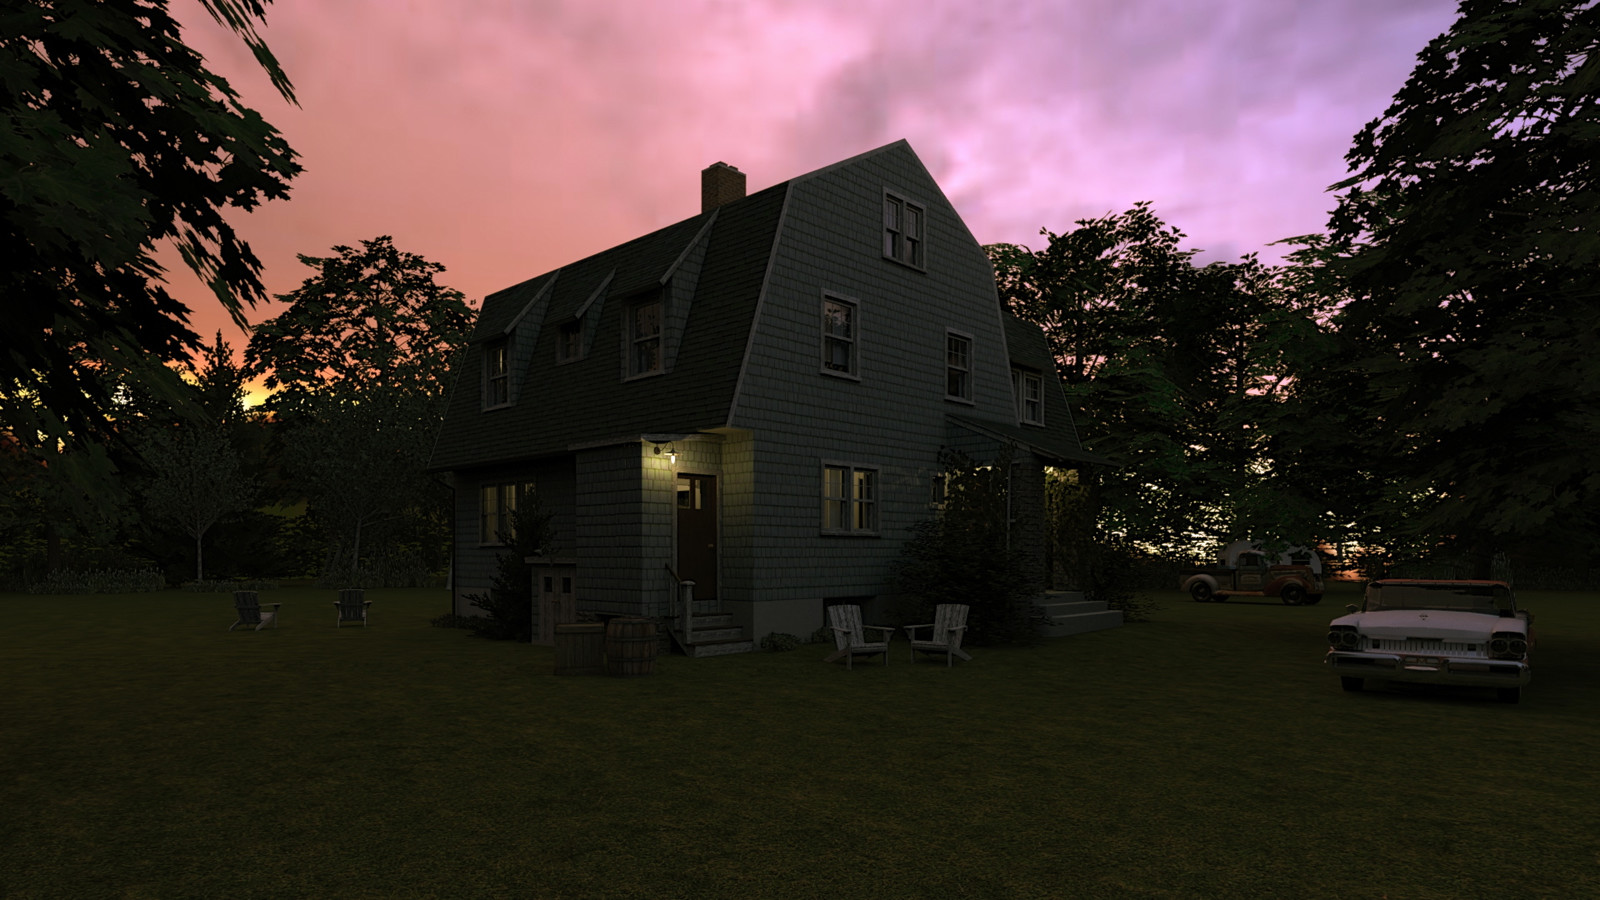 "Mason Farm - Cricket Cove" Magic Hour Collection

26 Masonfarm HD1080 06c - iP Kodac

"SketchUp to LayOut" The Mason Farm Renders for the launching of the new book
"SketchUp to LayOut" http://bit.ly/2j0d0Wh by MasterSketchup.